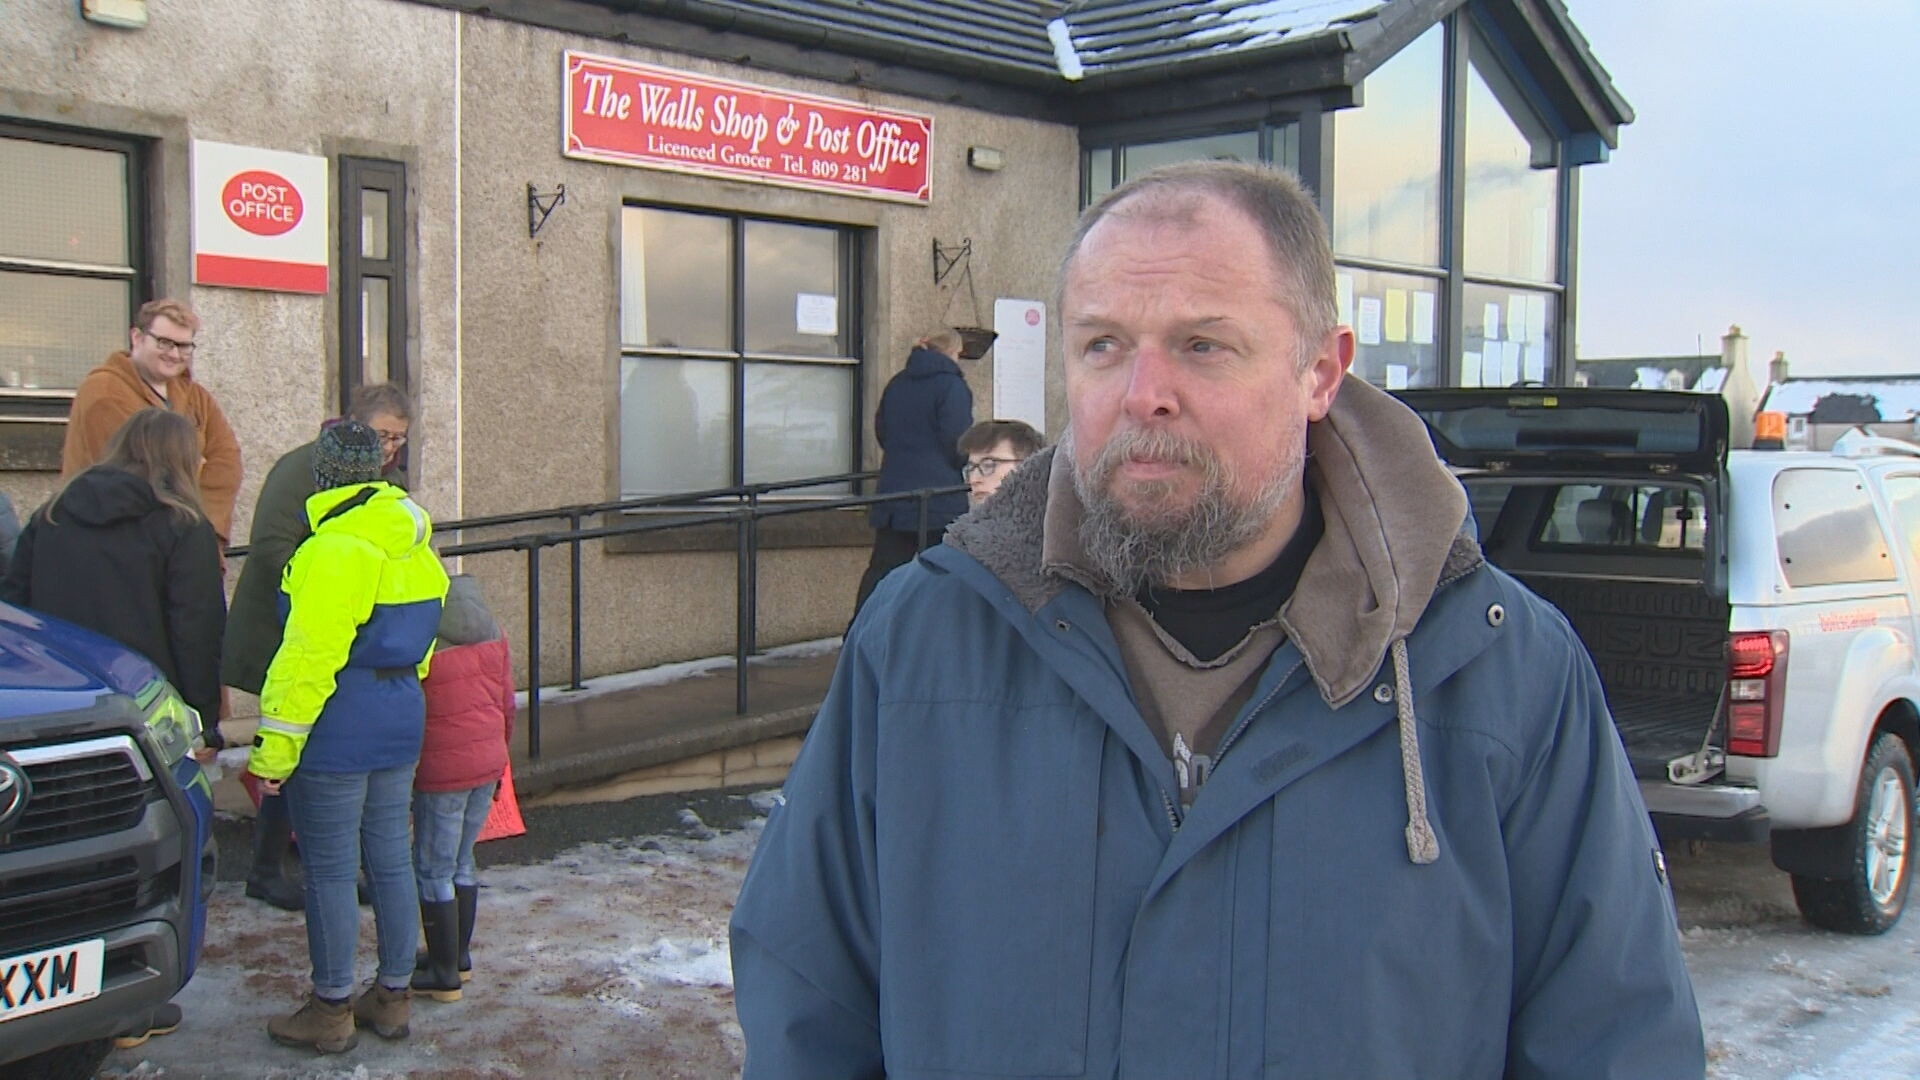 Roger Atkinson told STV news of his frustration at the response.